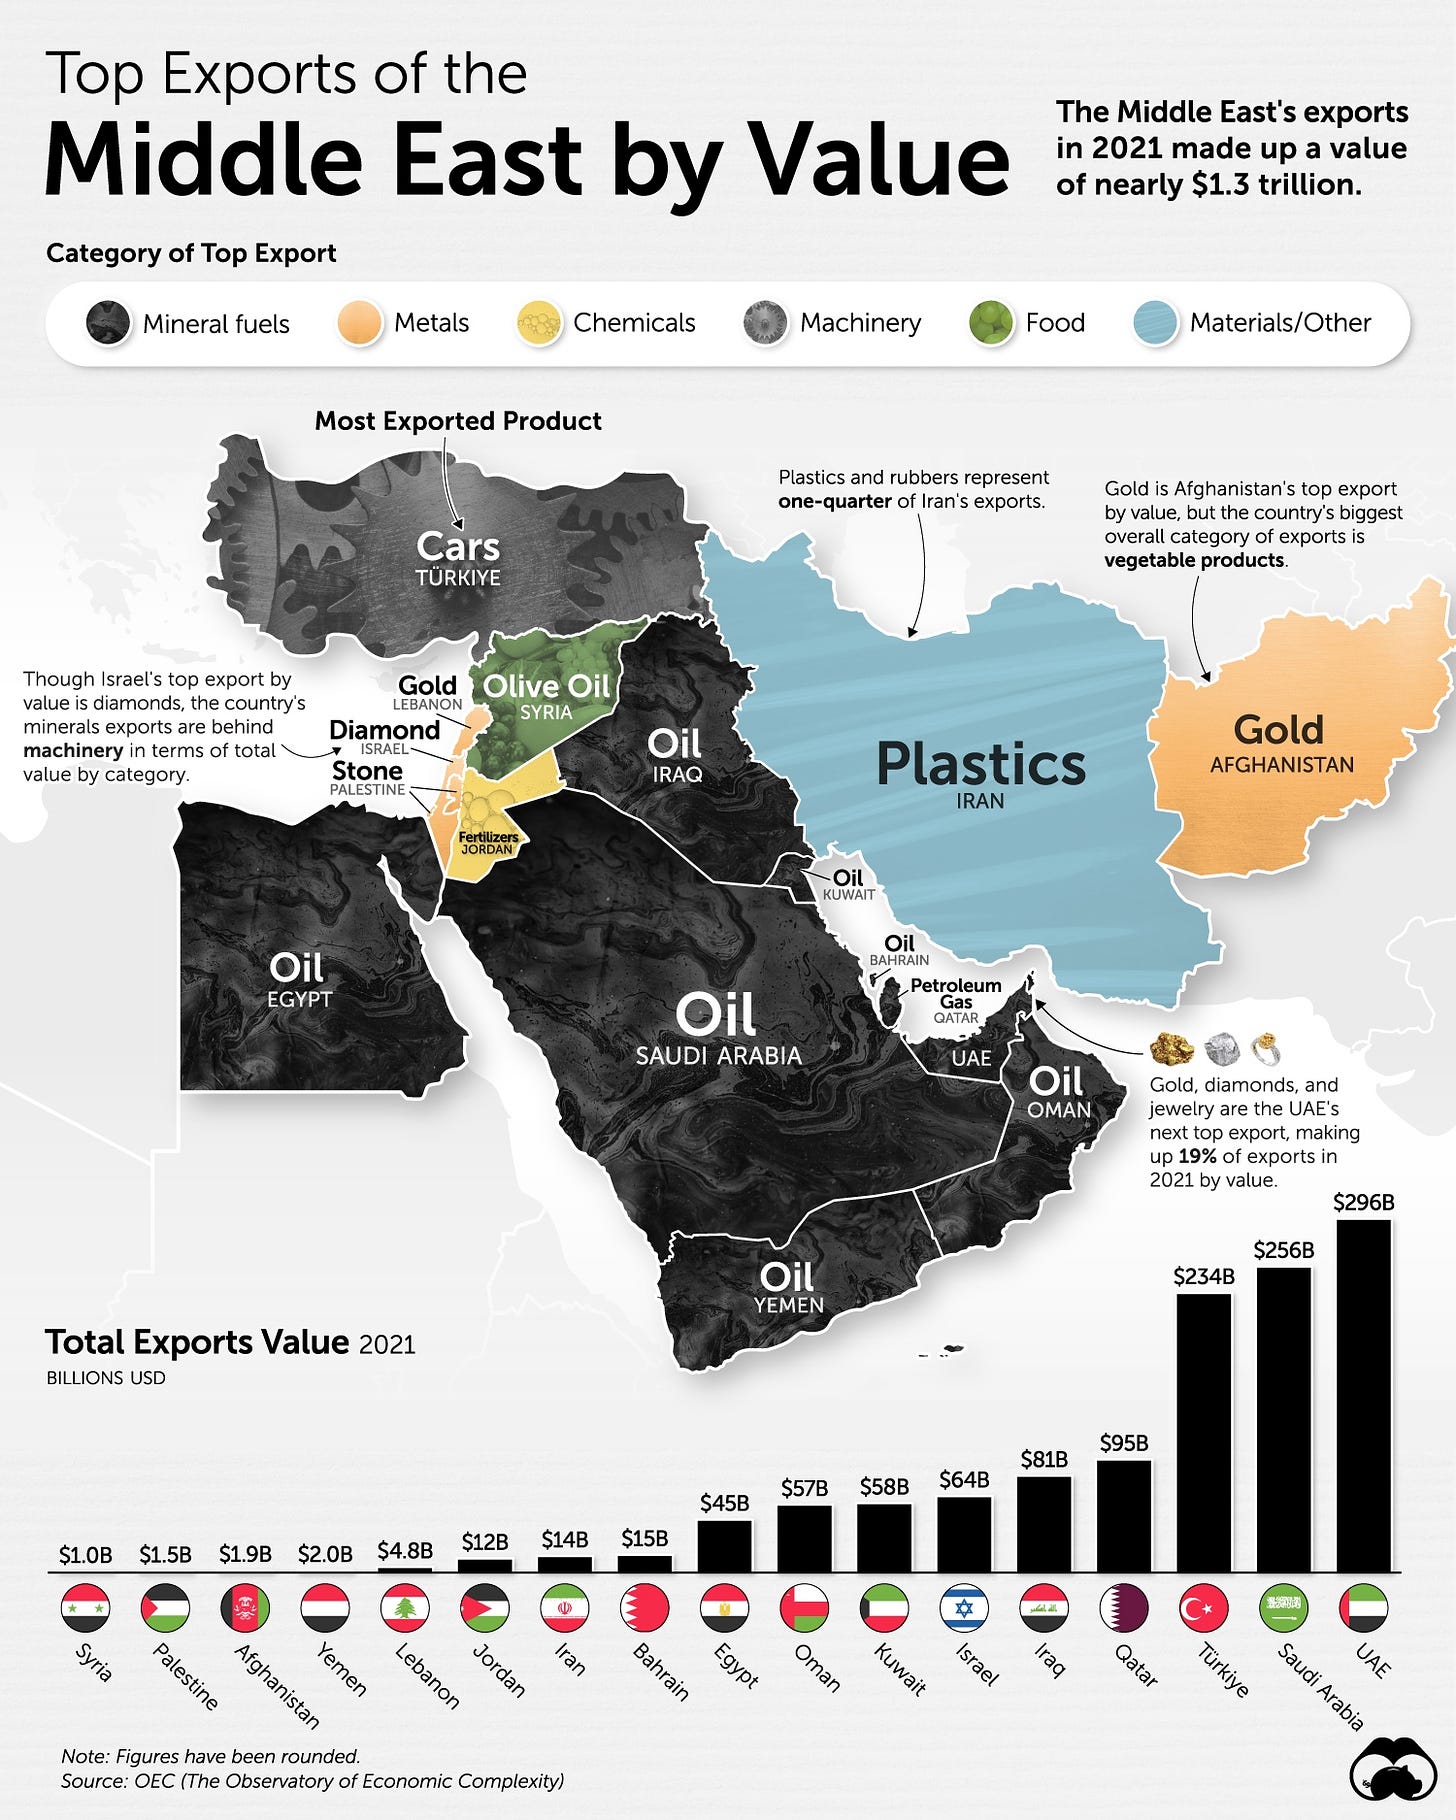 May be a graphic of map and text that says 'Top Exports of the Middle East by Value Category of Top Mineral fuels The Middle East's exports 2021 made up value of nearly $1.3 trillion. Metals Chemicals Machinery Most Exported Product Food Materials/Other Plastics Cars TÜRKIYE rubbers represent ofran's top diamonds Afghanistan's country's ehind machinery valu category. Olive Oil exports products. Diamond Oil RAQ Plastics IRAN Gold AFGHANISTAN Oil EGYPT KUWAIT Petroleum Oil SAUDI ARABIA Oil UAE's export, Total Exports Value 2021 USD 2021 value. Oil YEMEN $296B $256B $234B $1.0B $1.5B $1.9B $2.0B $4.8B $57B $58B $81B $95B $64B Figures been rounded. Economic Complexity) Bahrain Egypt Oman Kuwait'